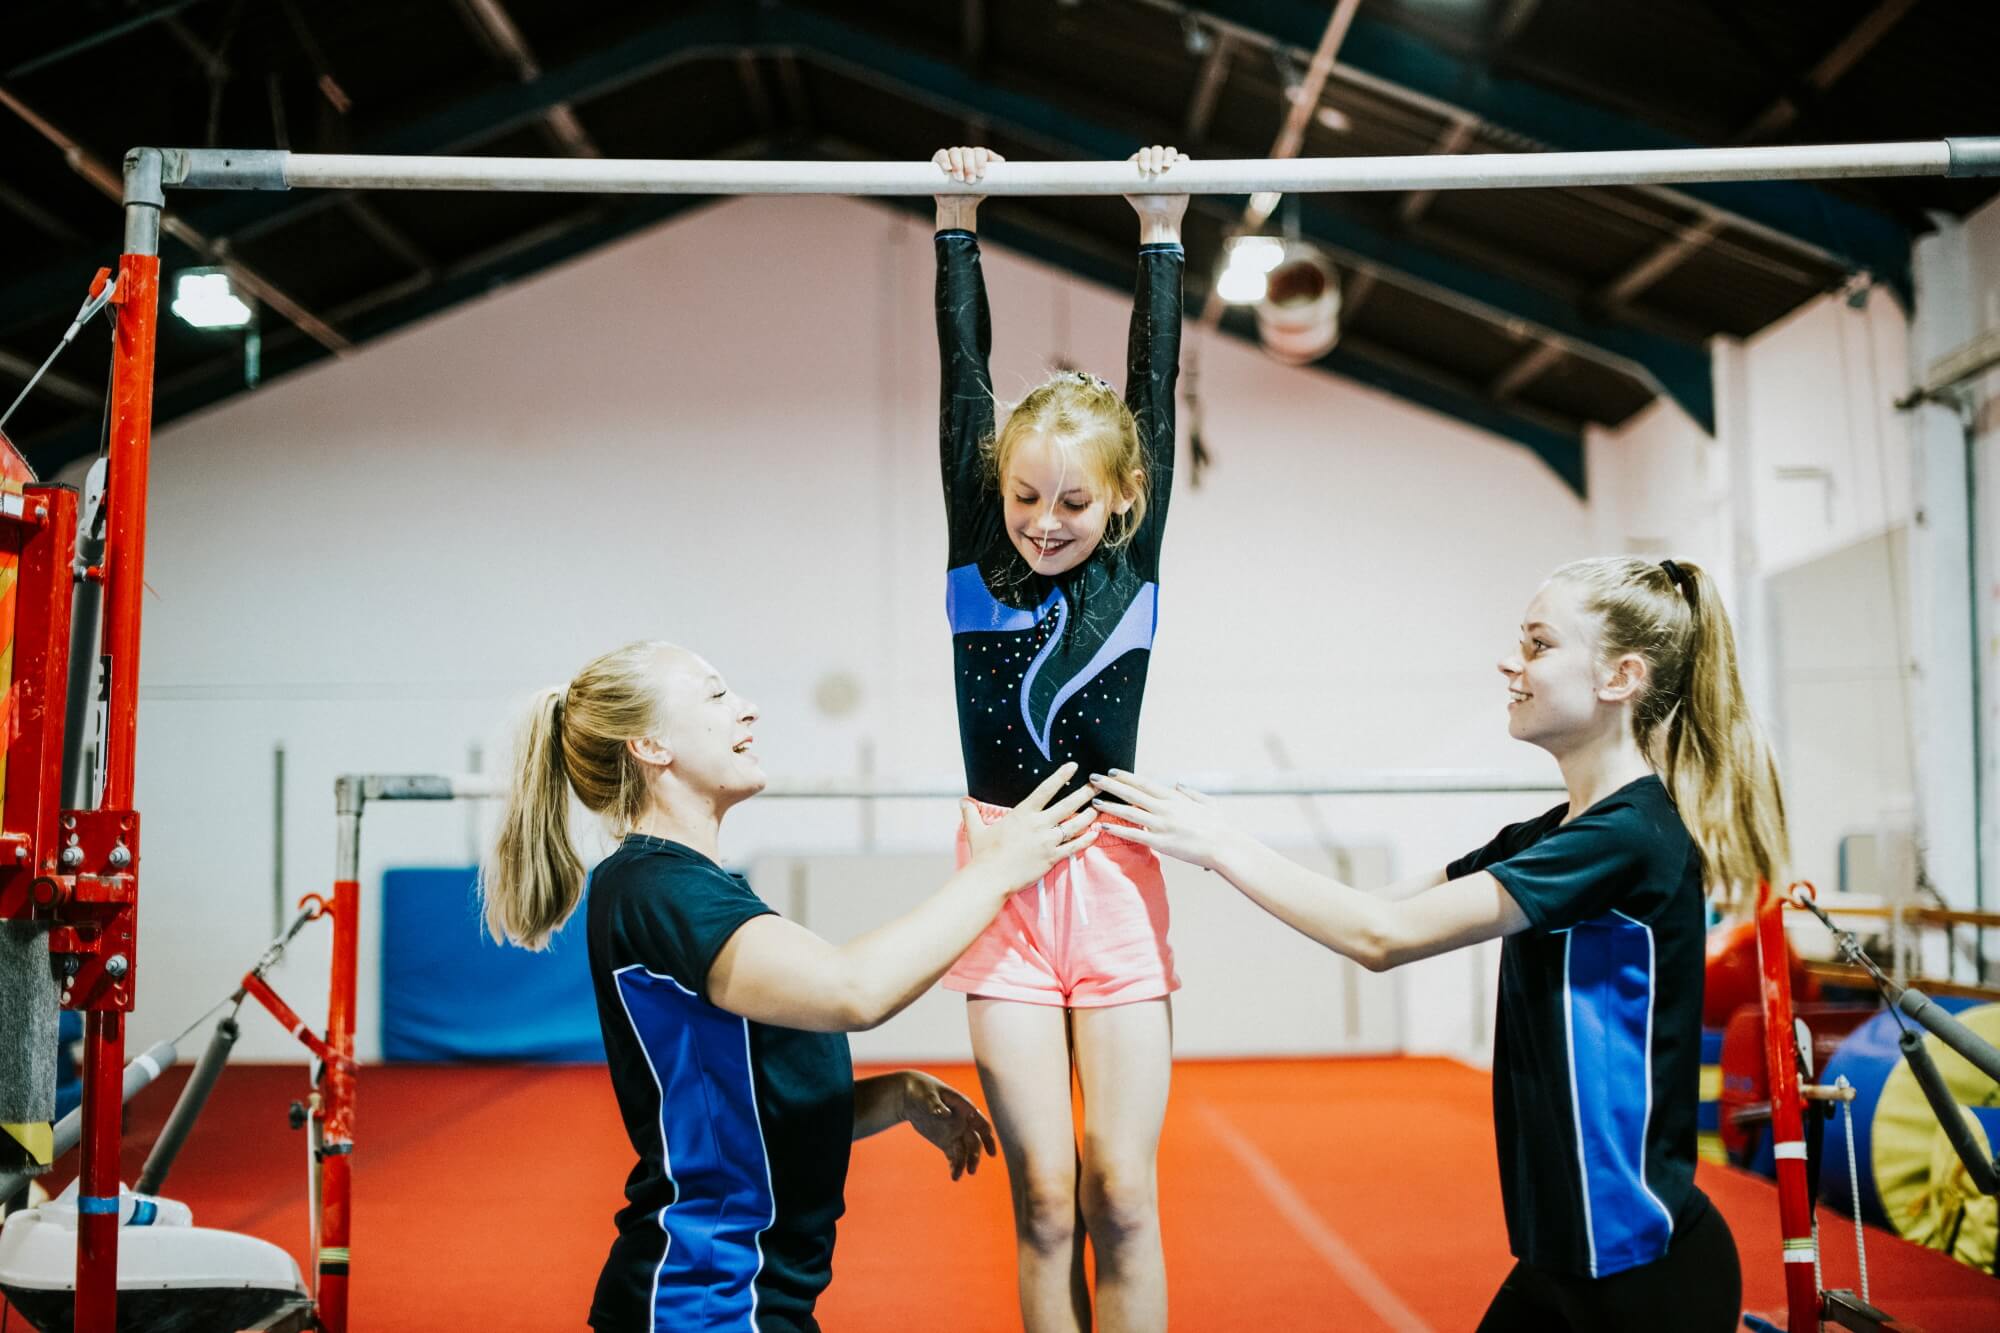 Two coaches stand either side of a young gymnast as she holds on to the bar apparatus